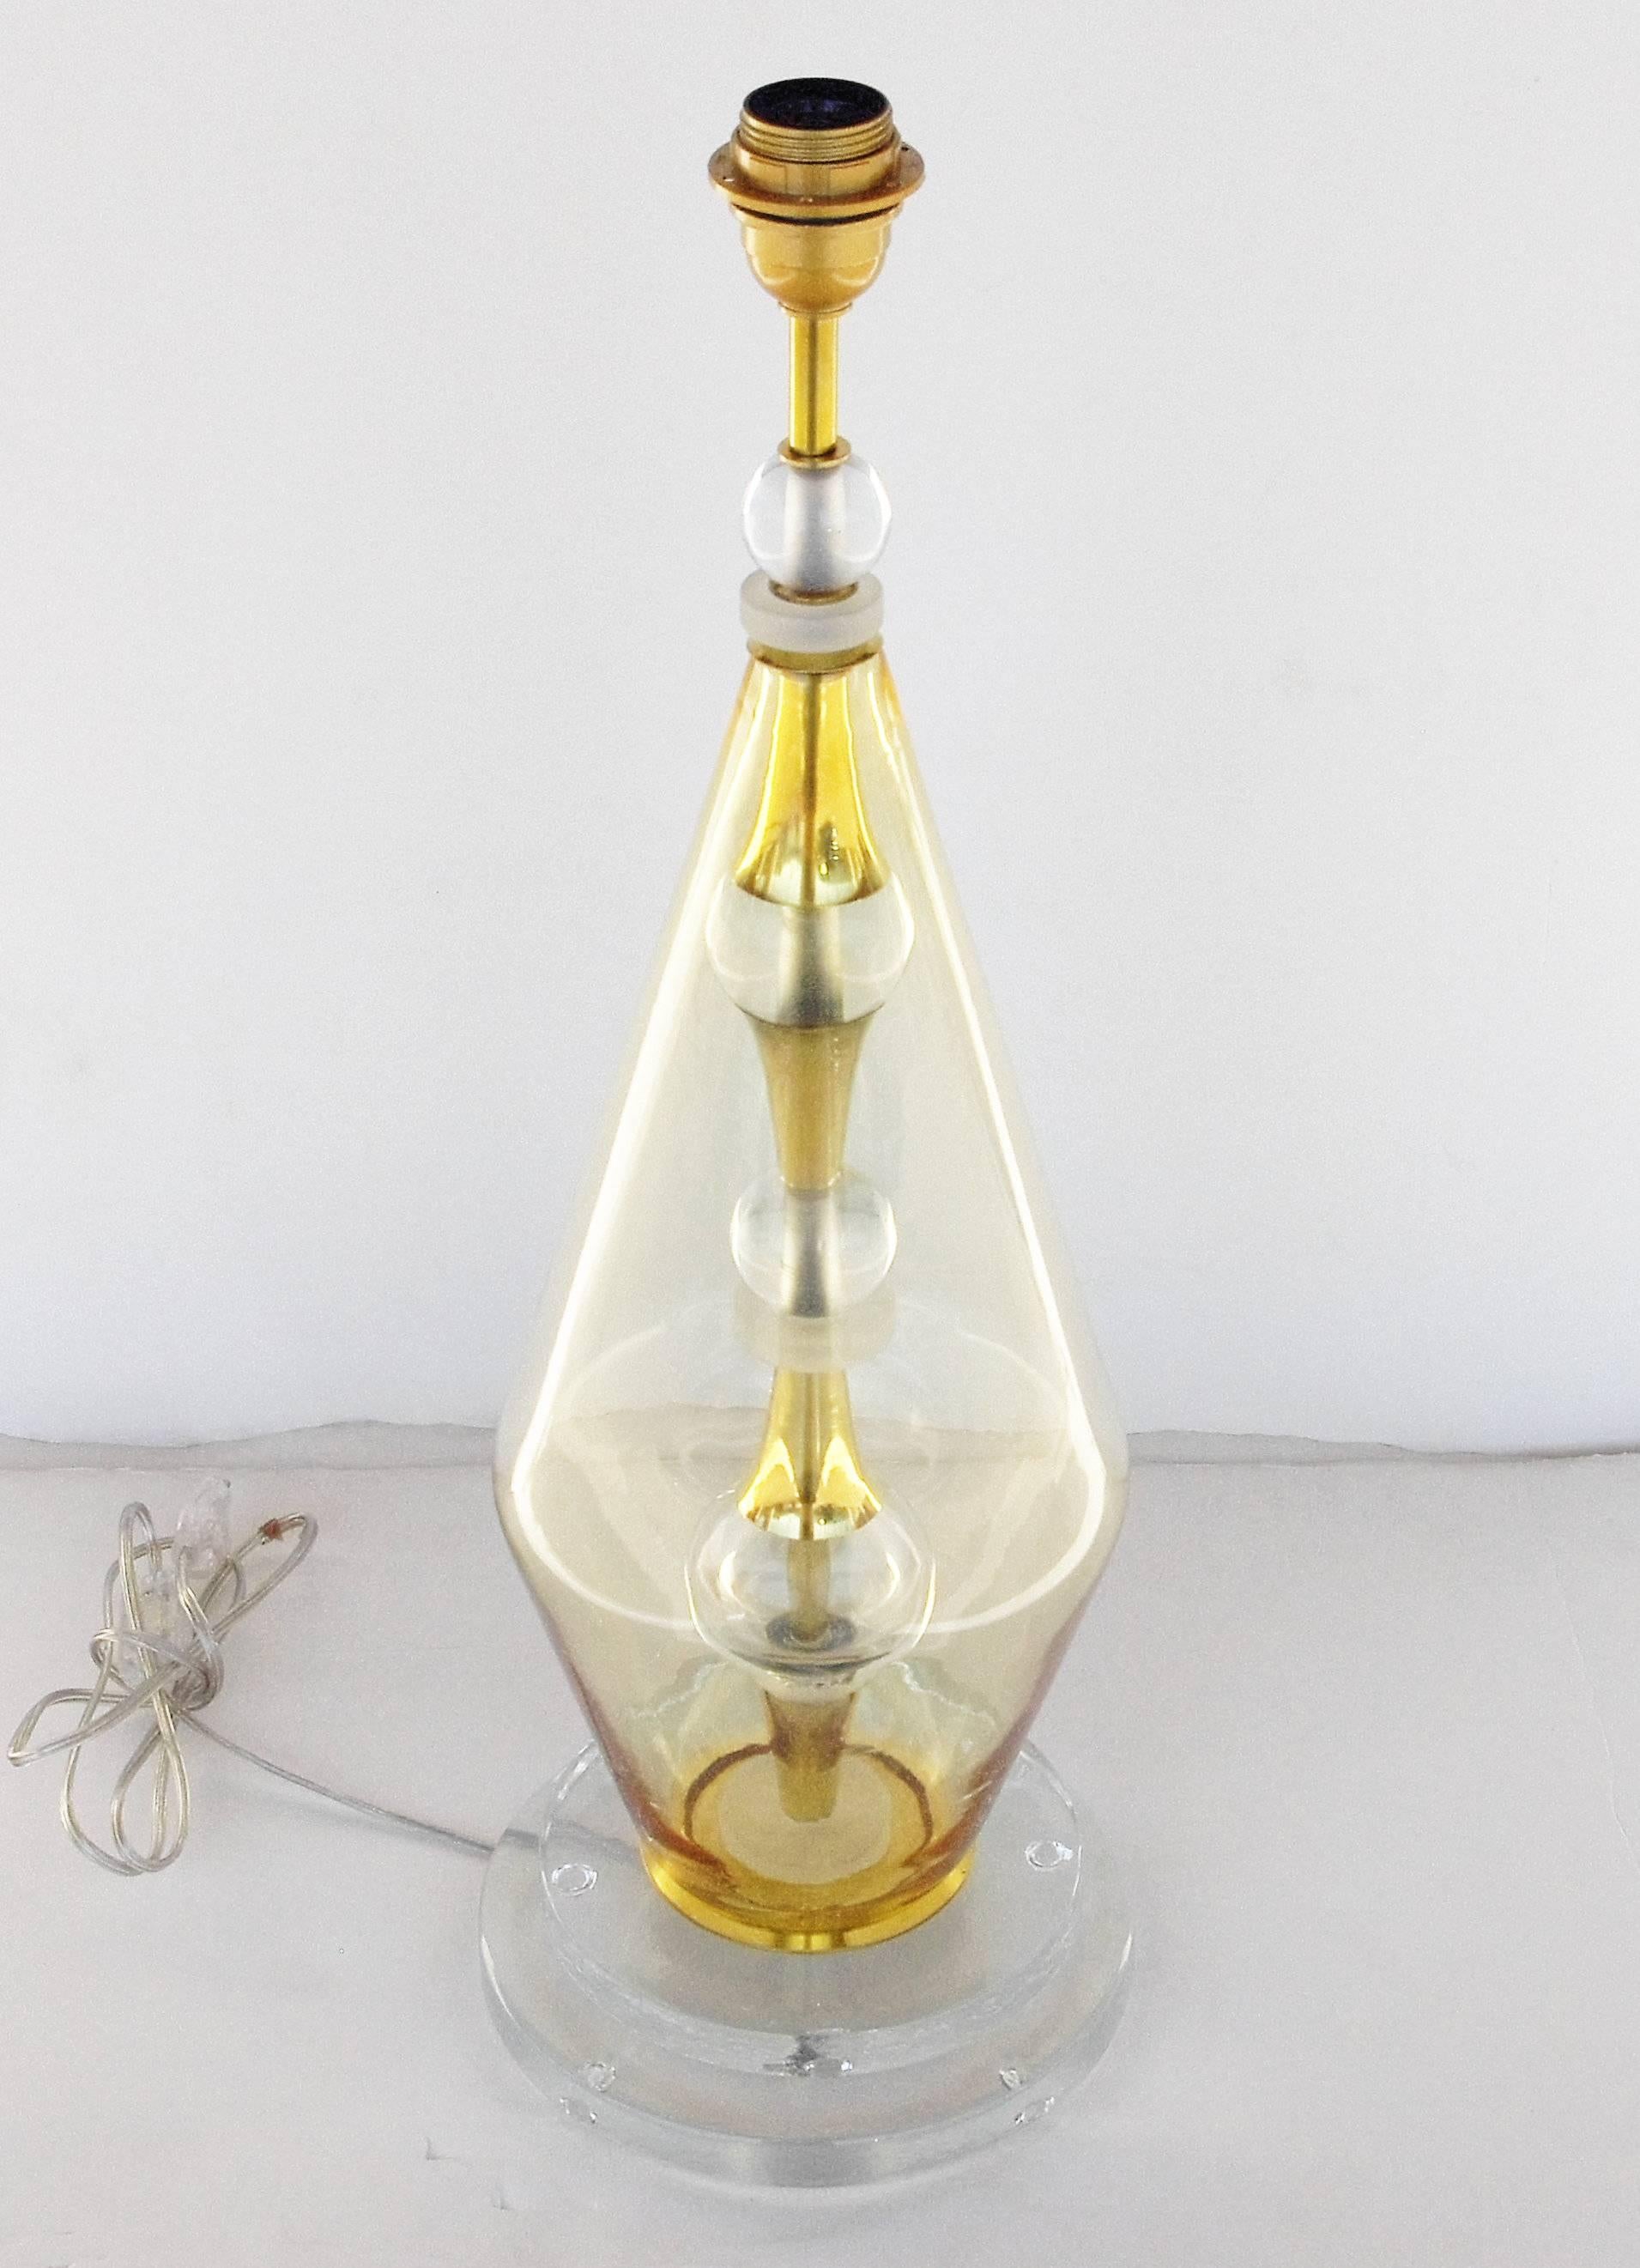 Vintage Italian Murano glass table lamp with gold infused and transparent Murano glasses, mounted on polished brass frame / In the style of Ettore Sottsass / Made in Italy circa 1980’s
1 light / E26 or E27 type / max 60W  
Height: 25.5 inches /